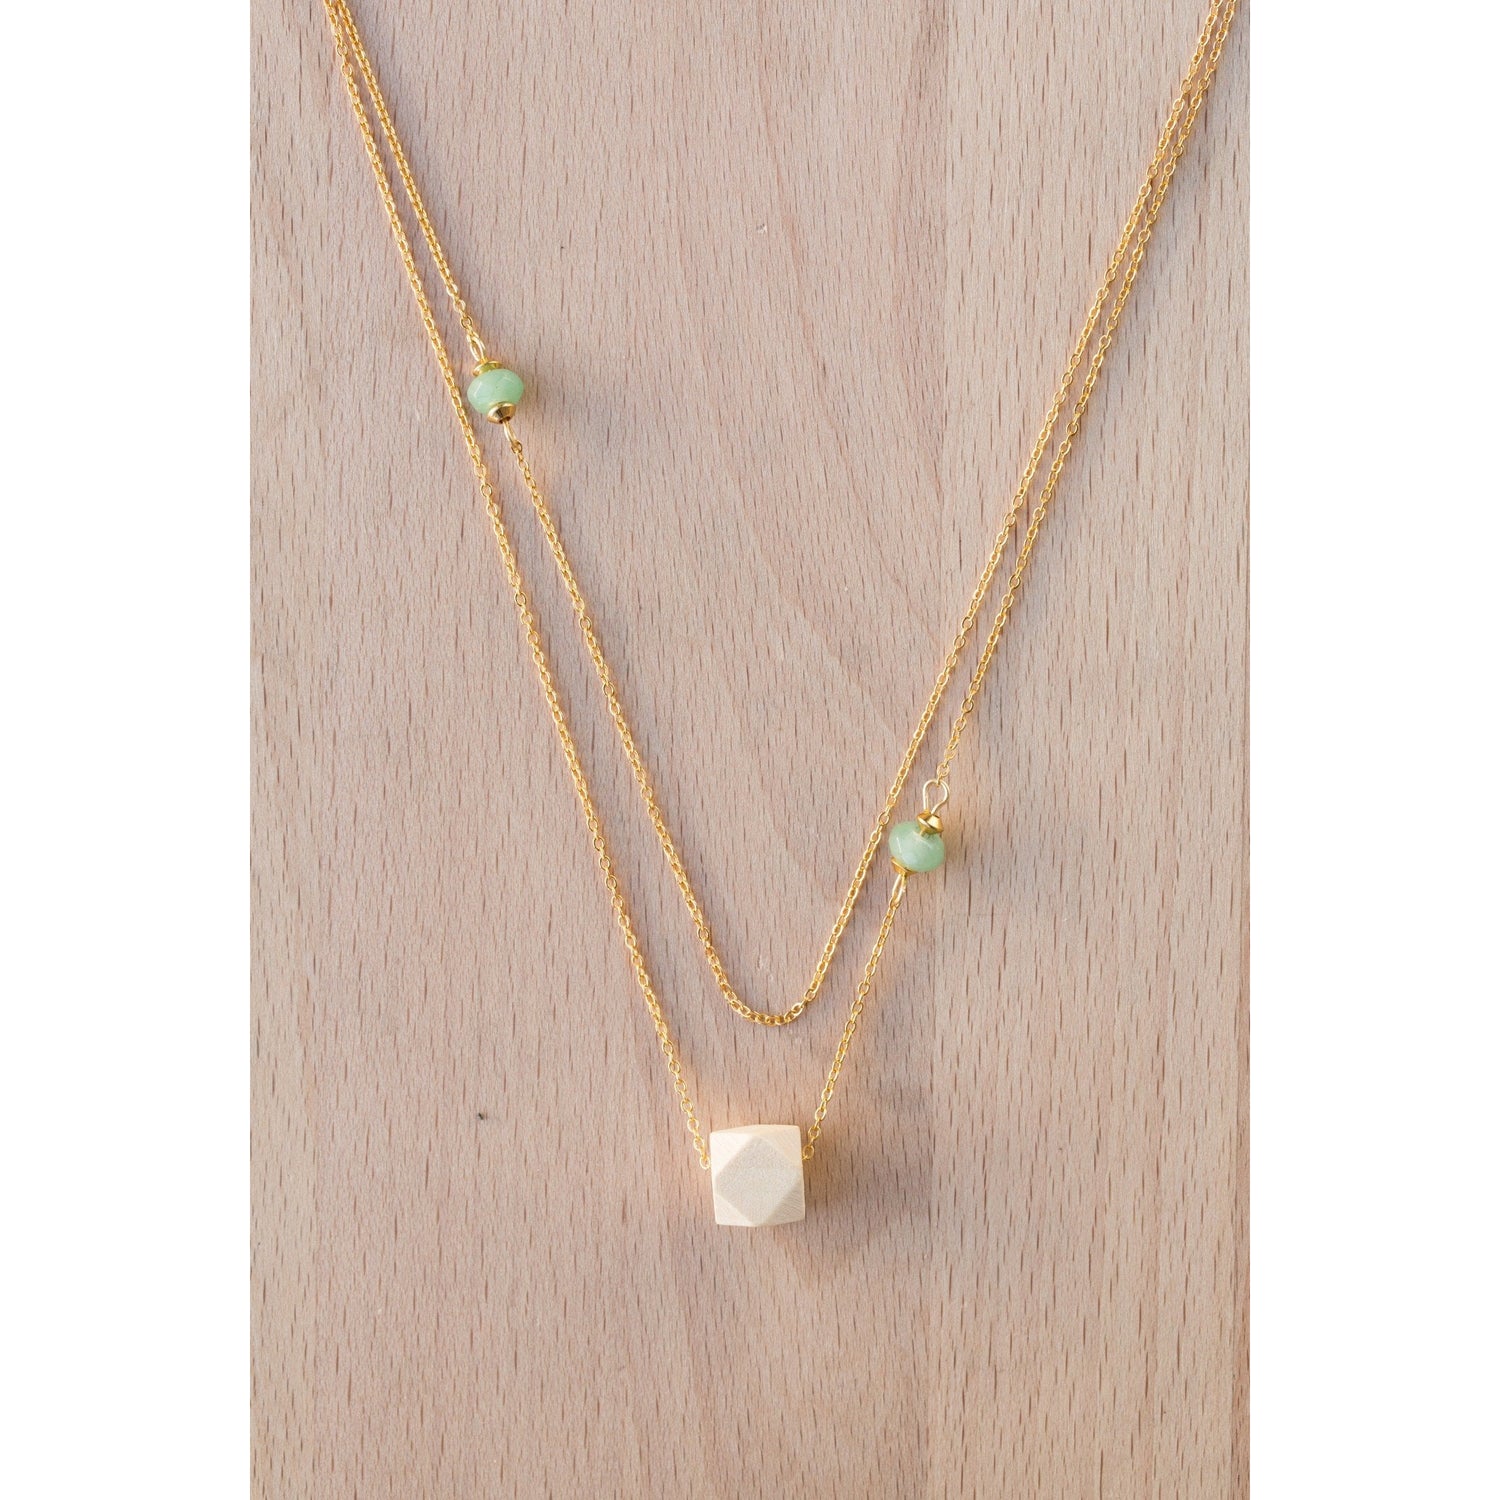 Layered Wood and Double Gemstones on Gold Chain - Tittup Unique Aromatherapy & Jewellery